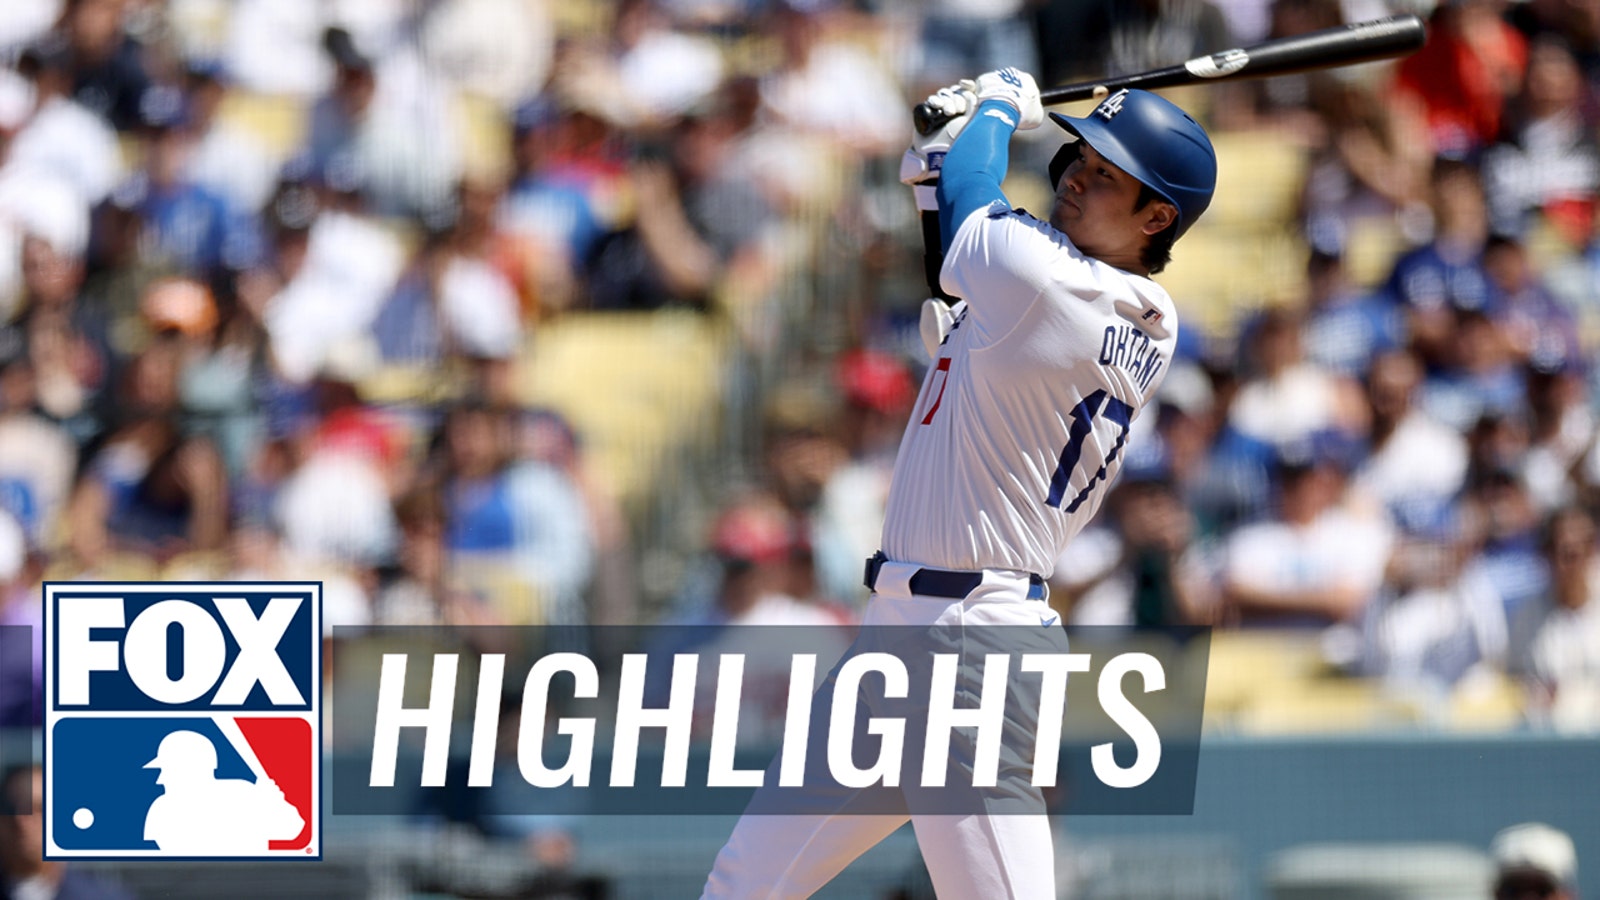 Shohei Ohtani homers twice in Dodgers' win over Braves